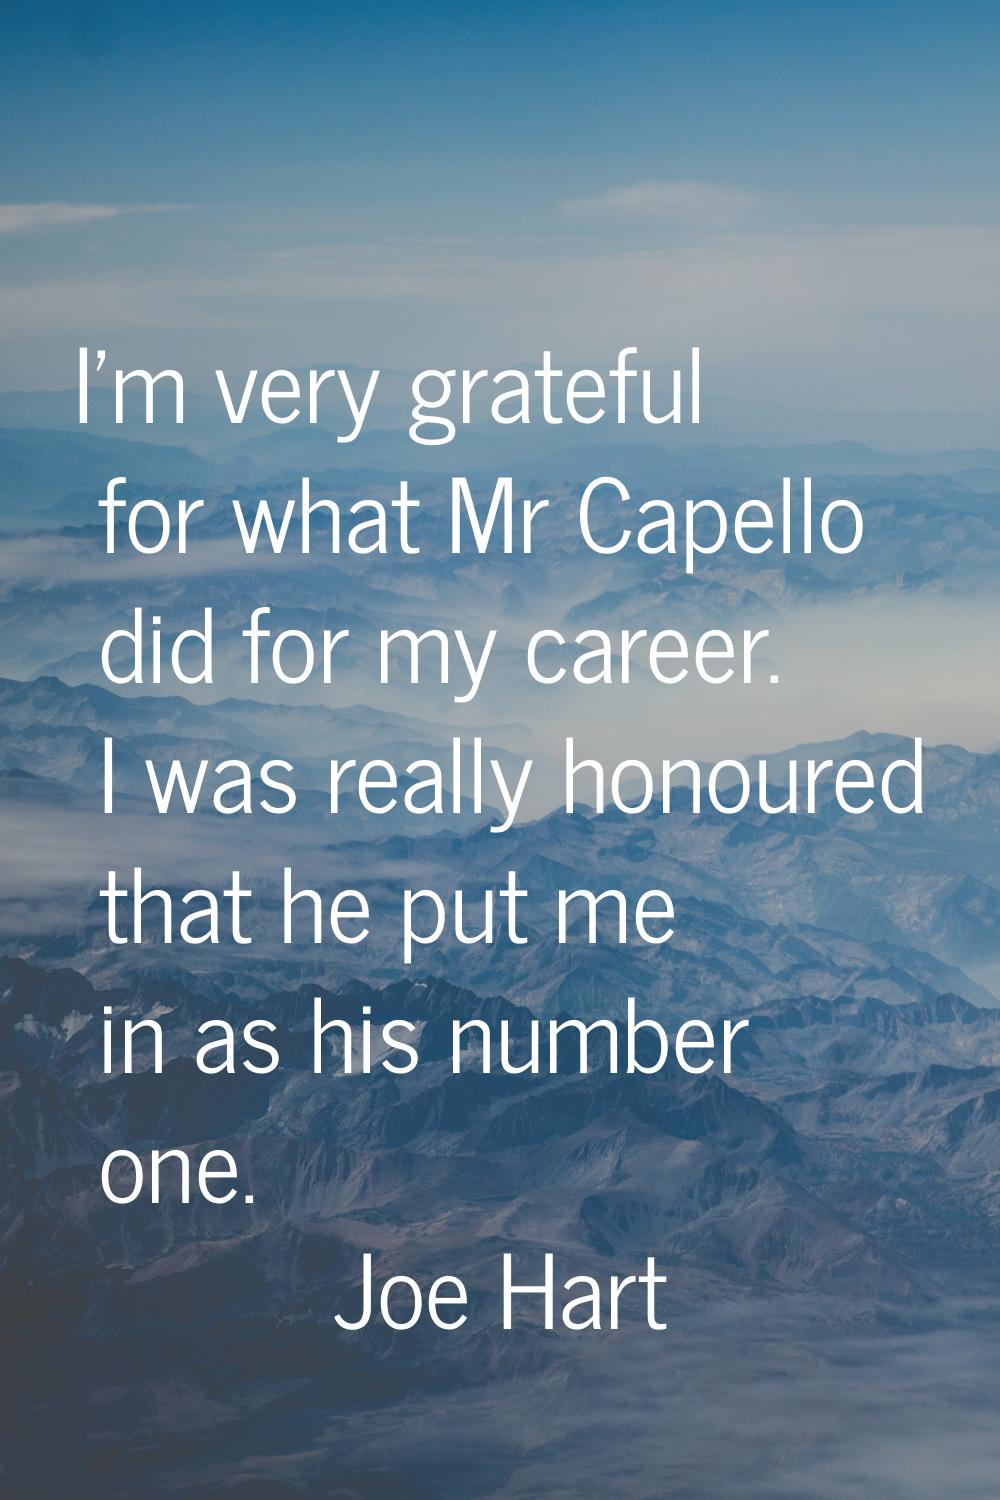 I'm very grateful for what Mr Capello did for my career. I was really honoured that he put me in as